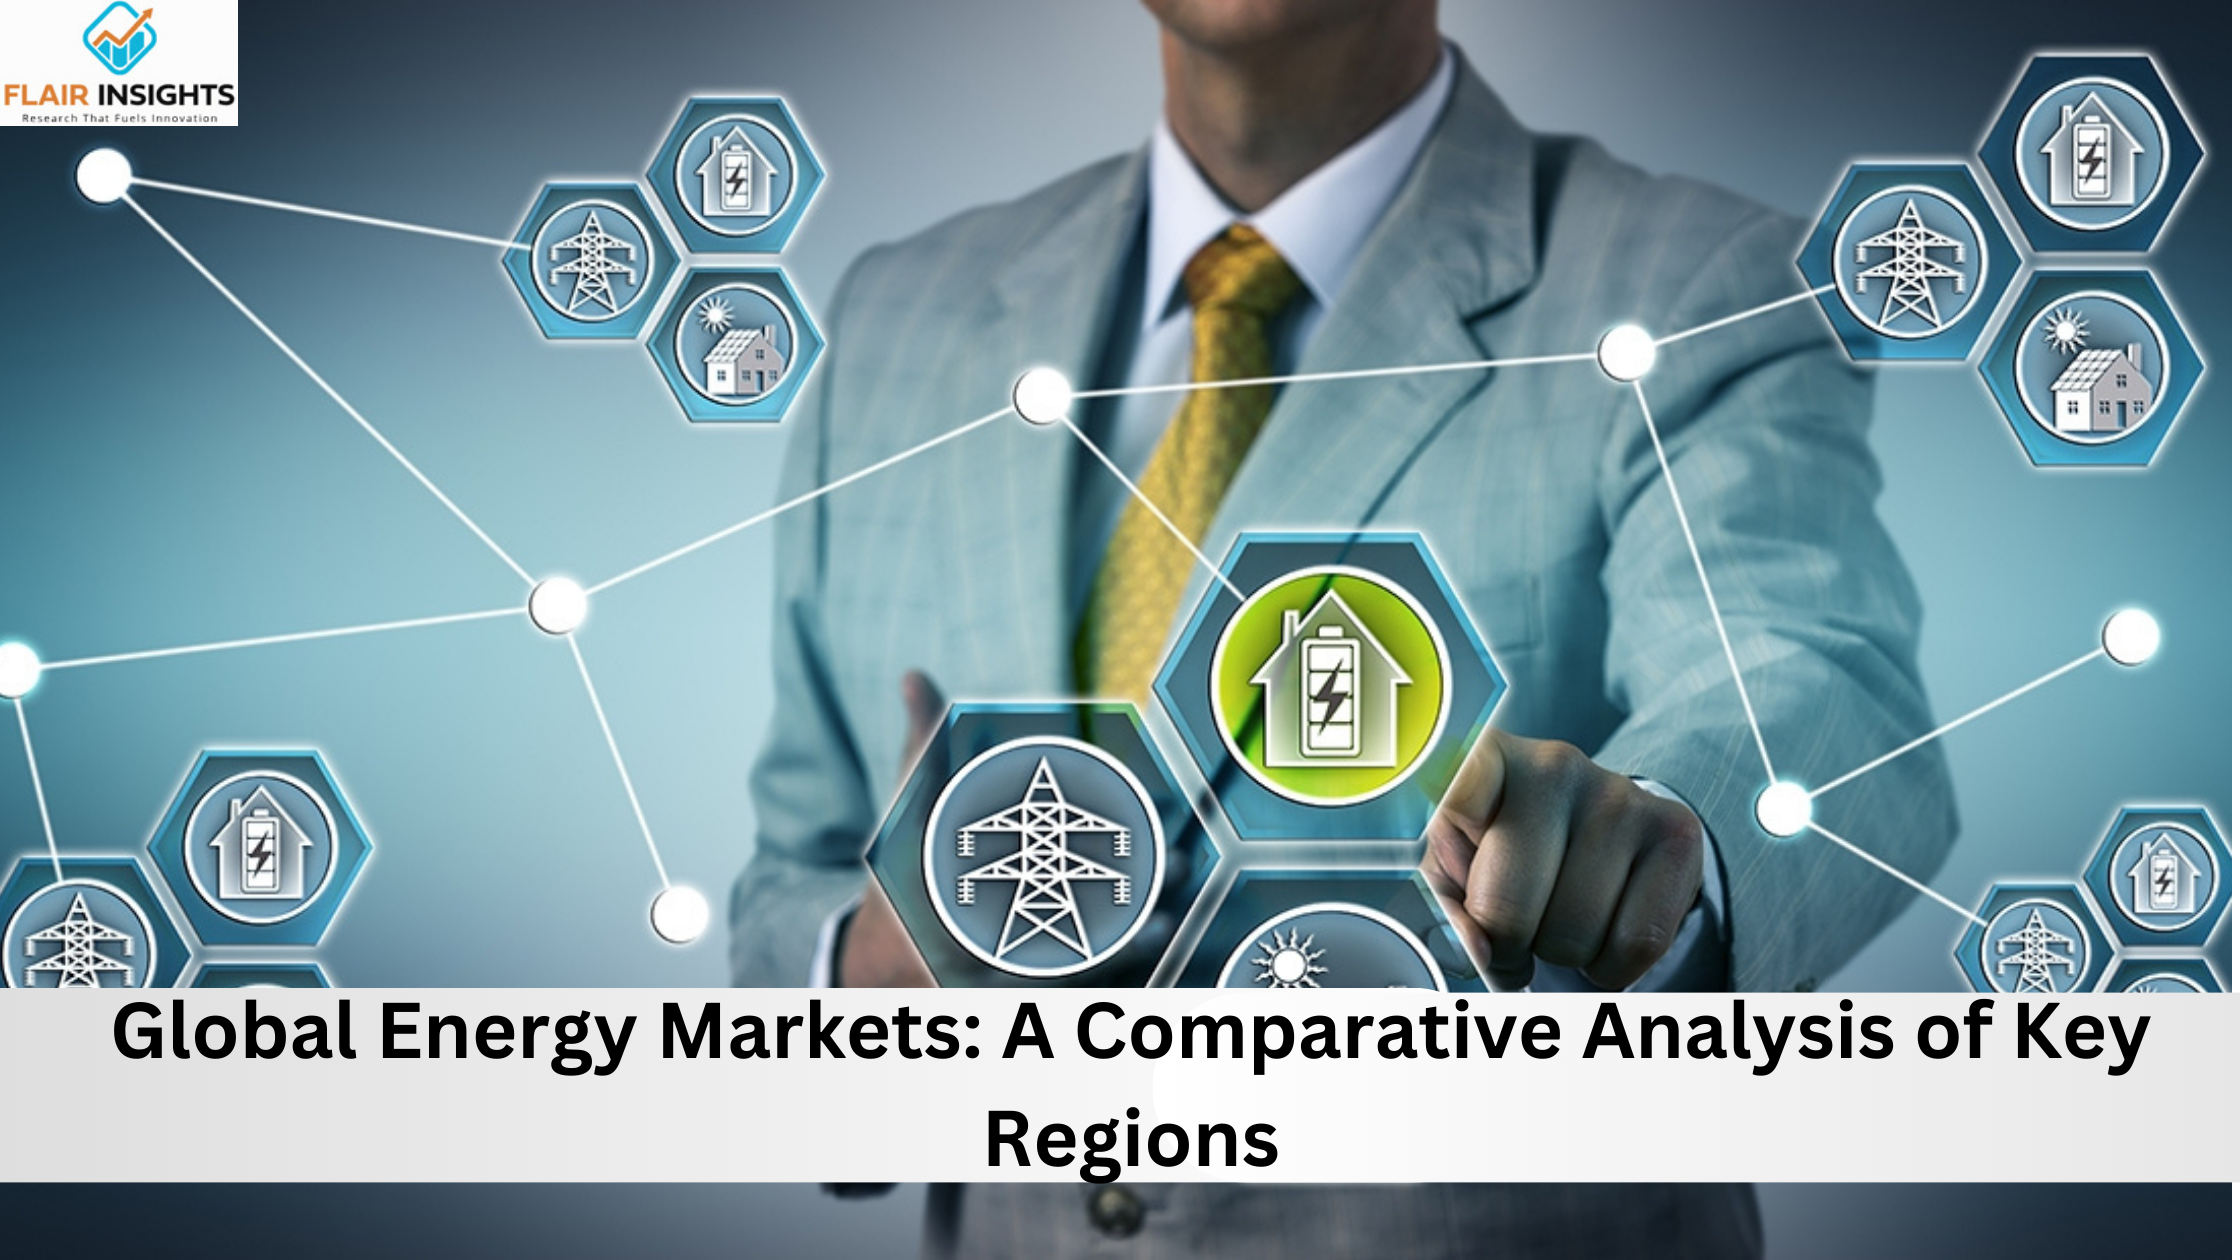 Global Energy Markets: A Comparative Analysis of Key Regions